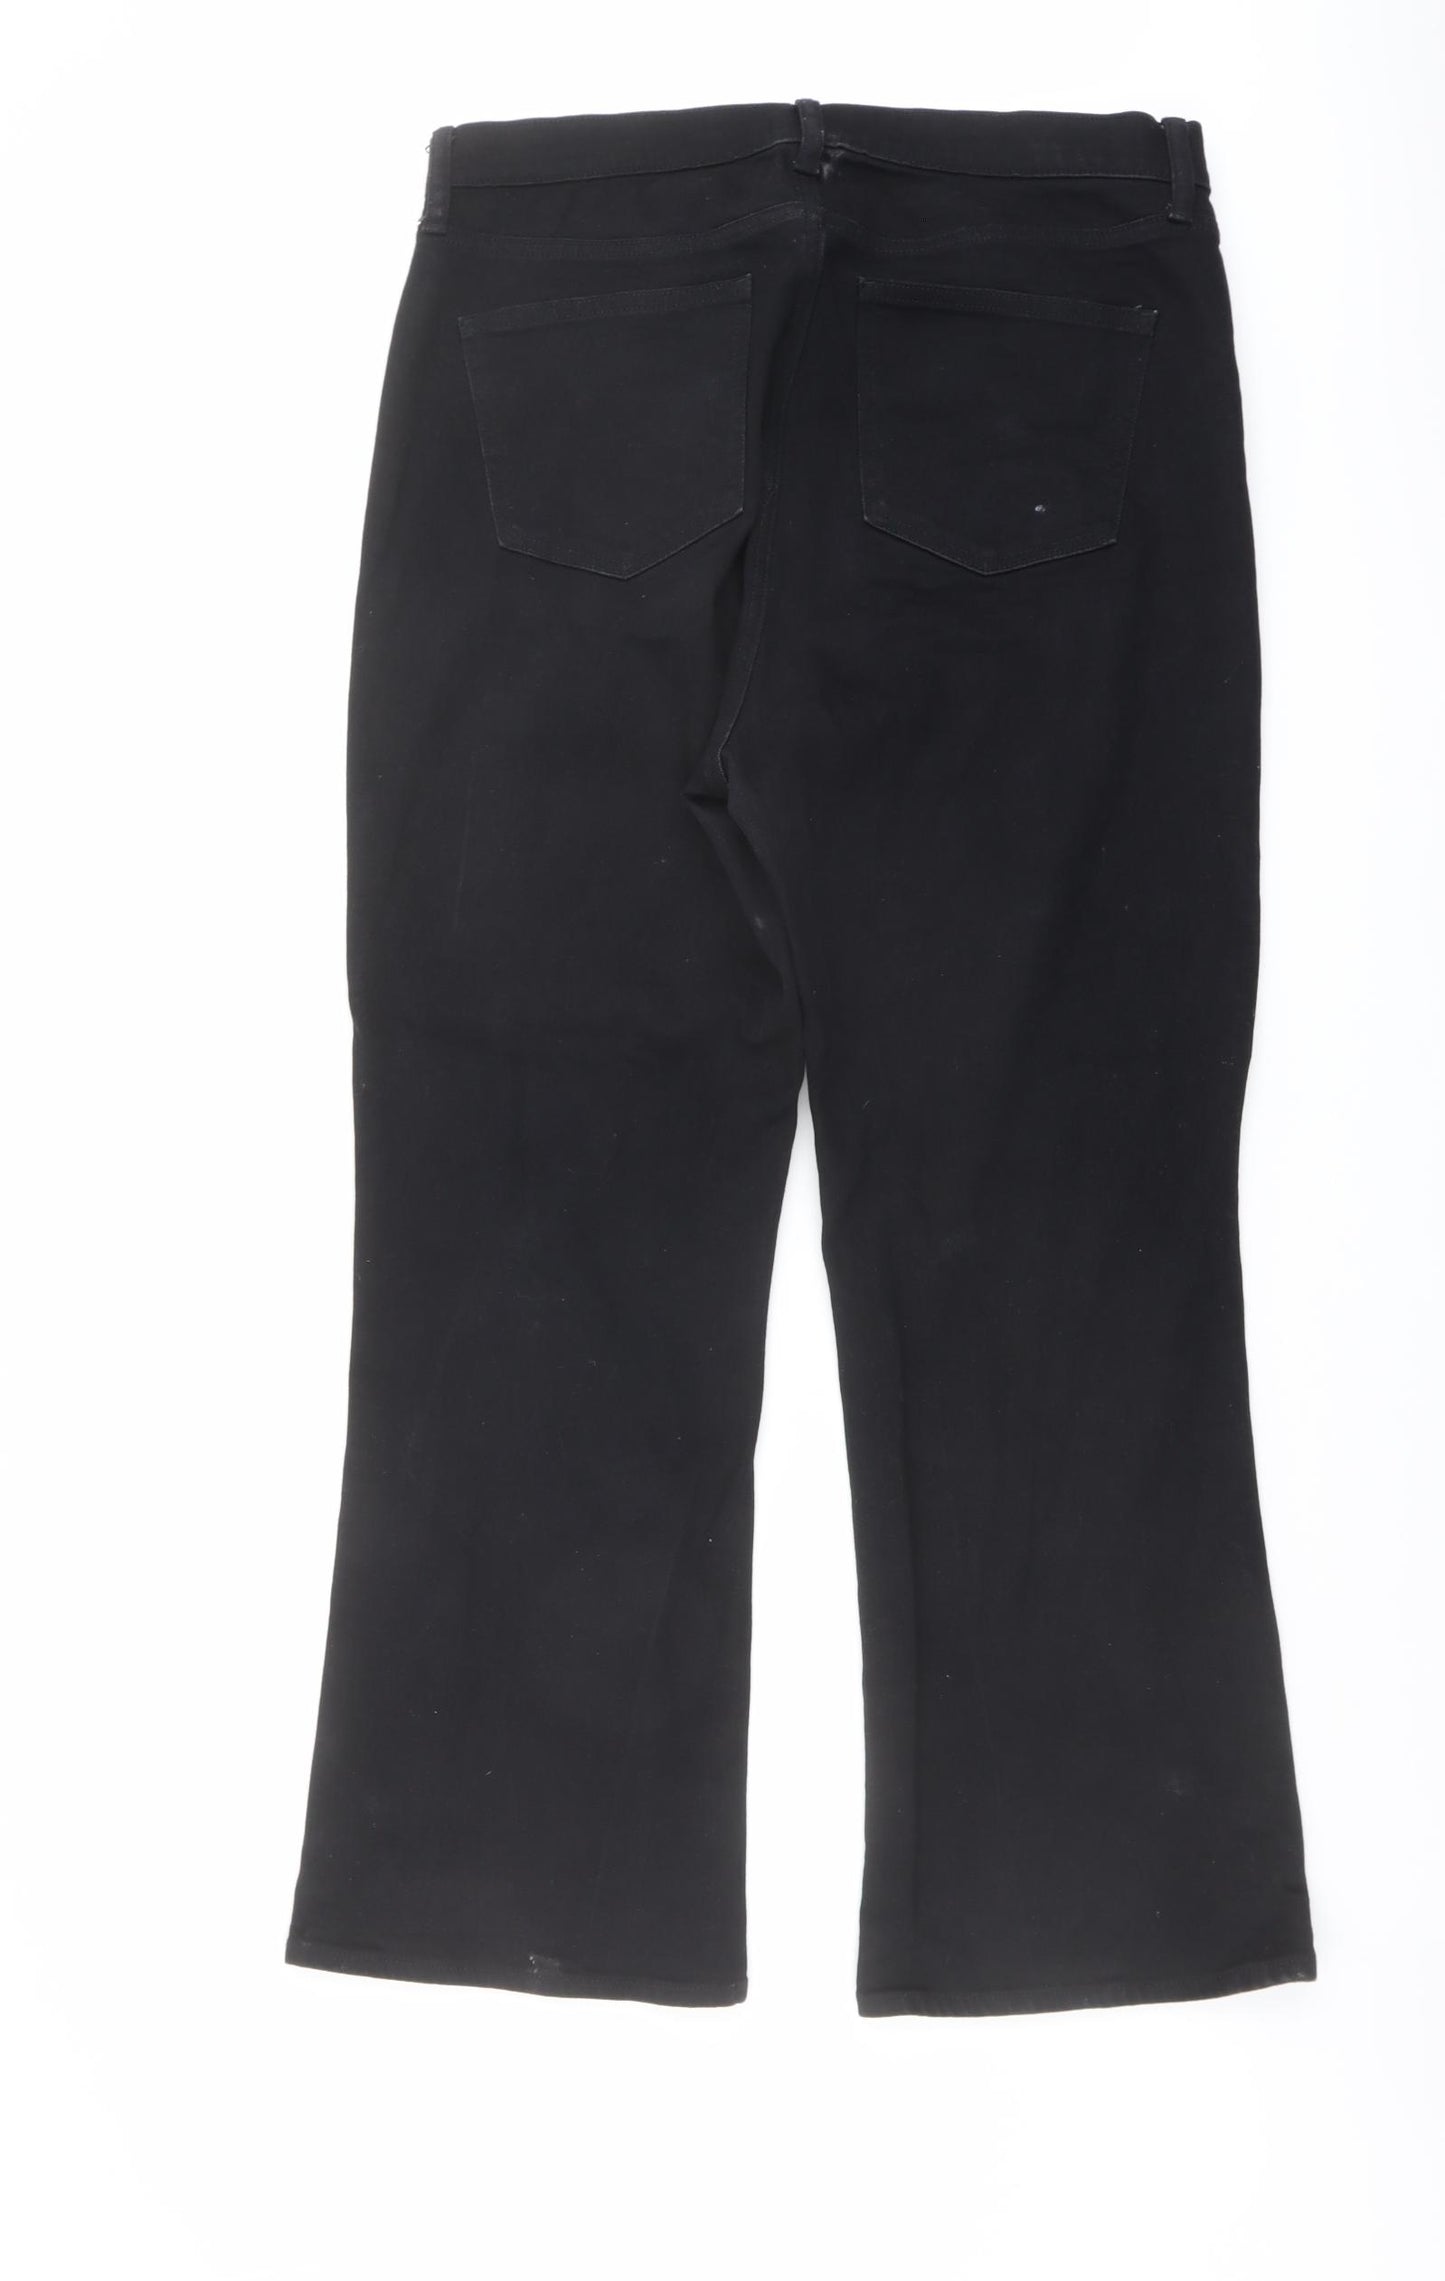 Uniqlo Womens Black Cotton Bootcut Jeans Size 32 in L28 in Regular Button